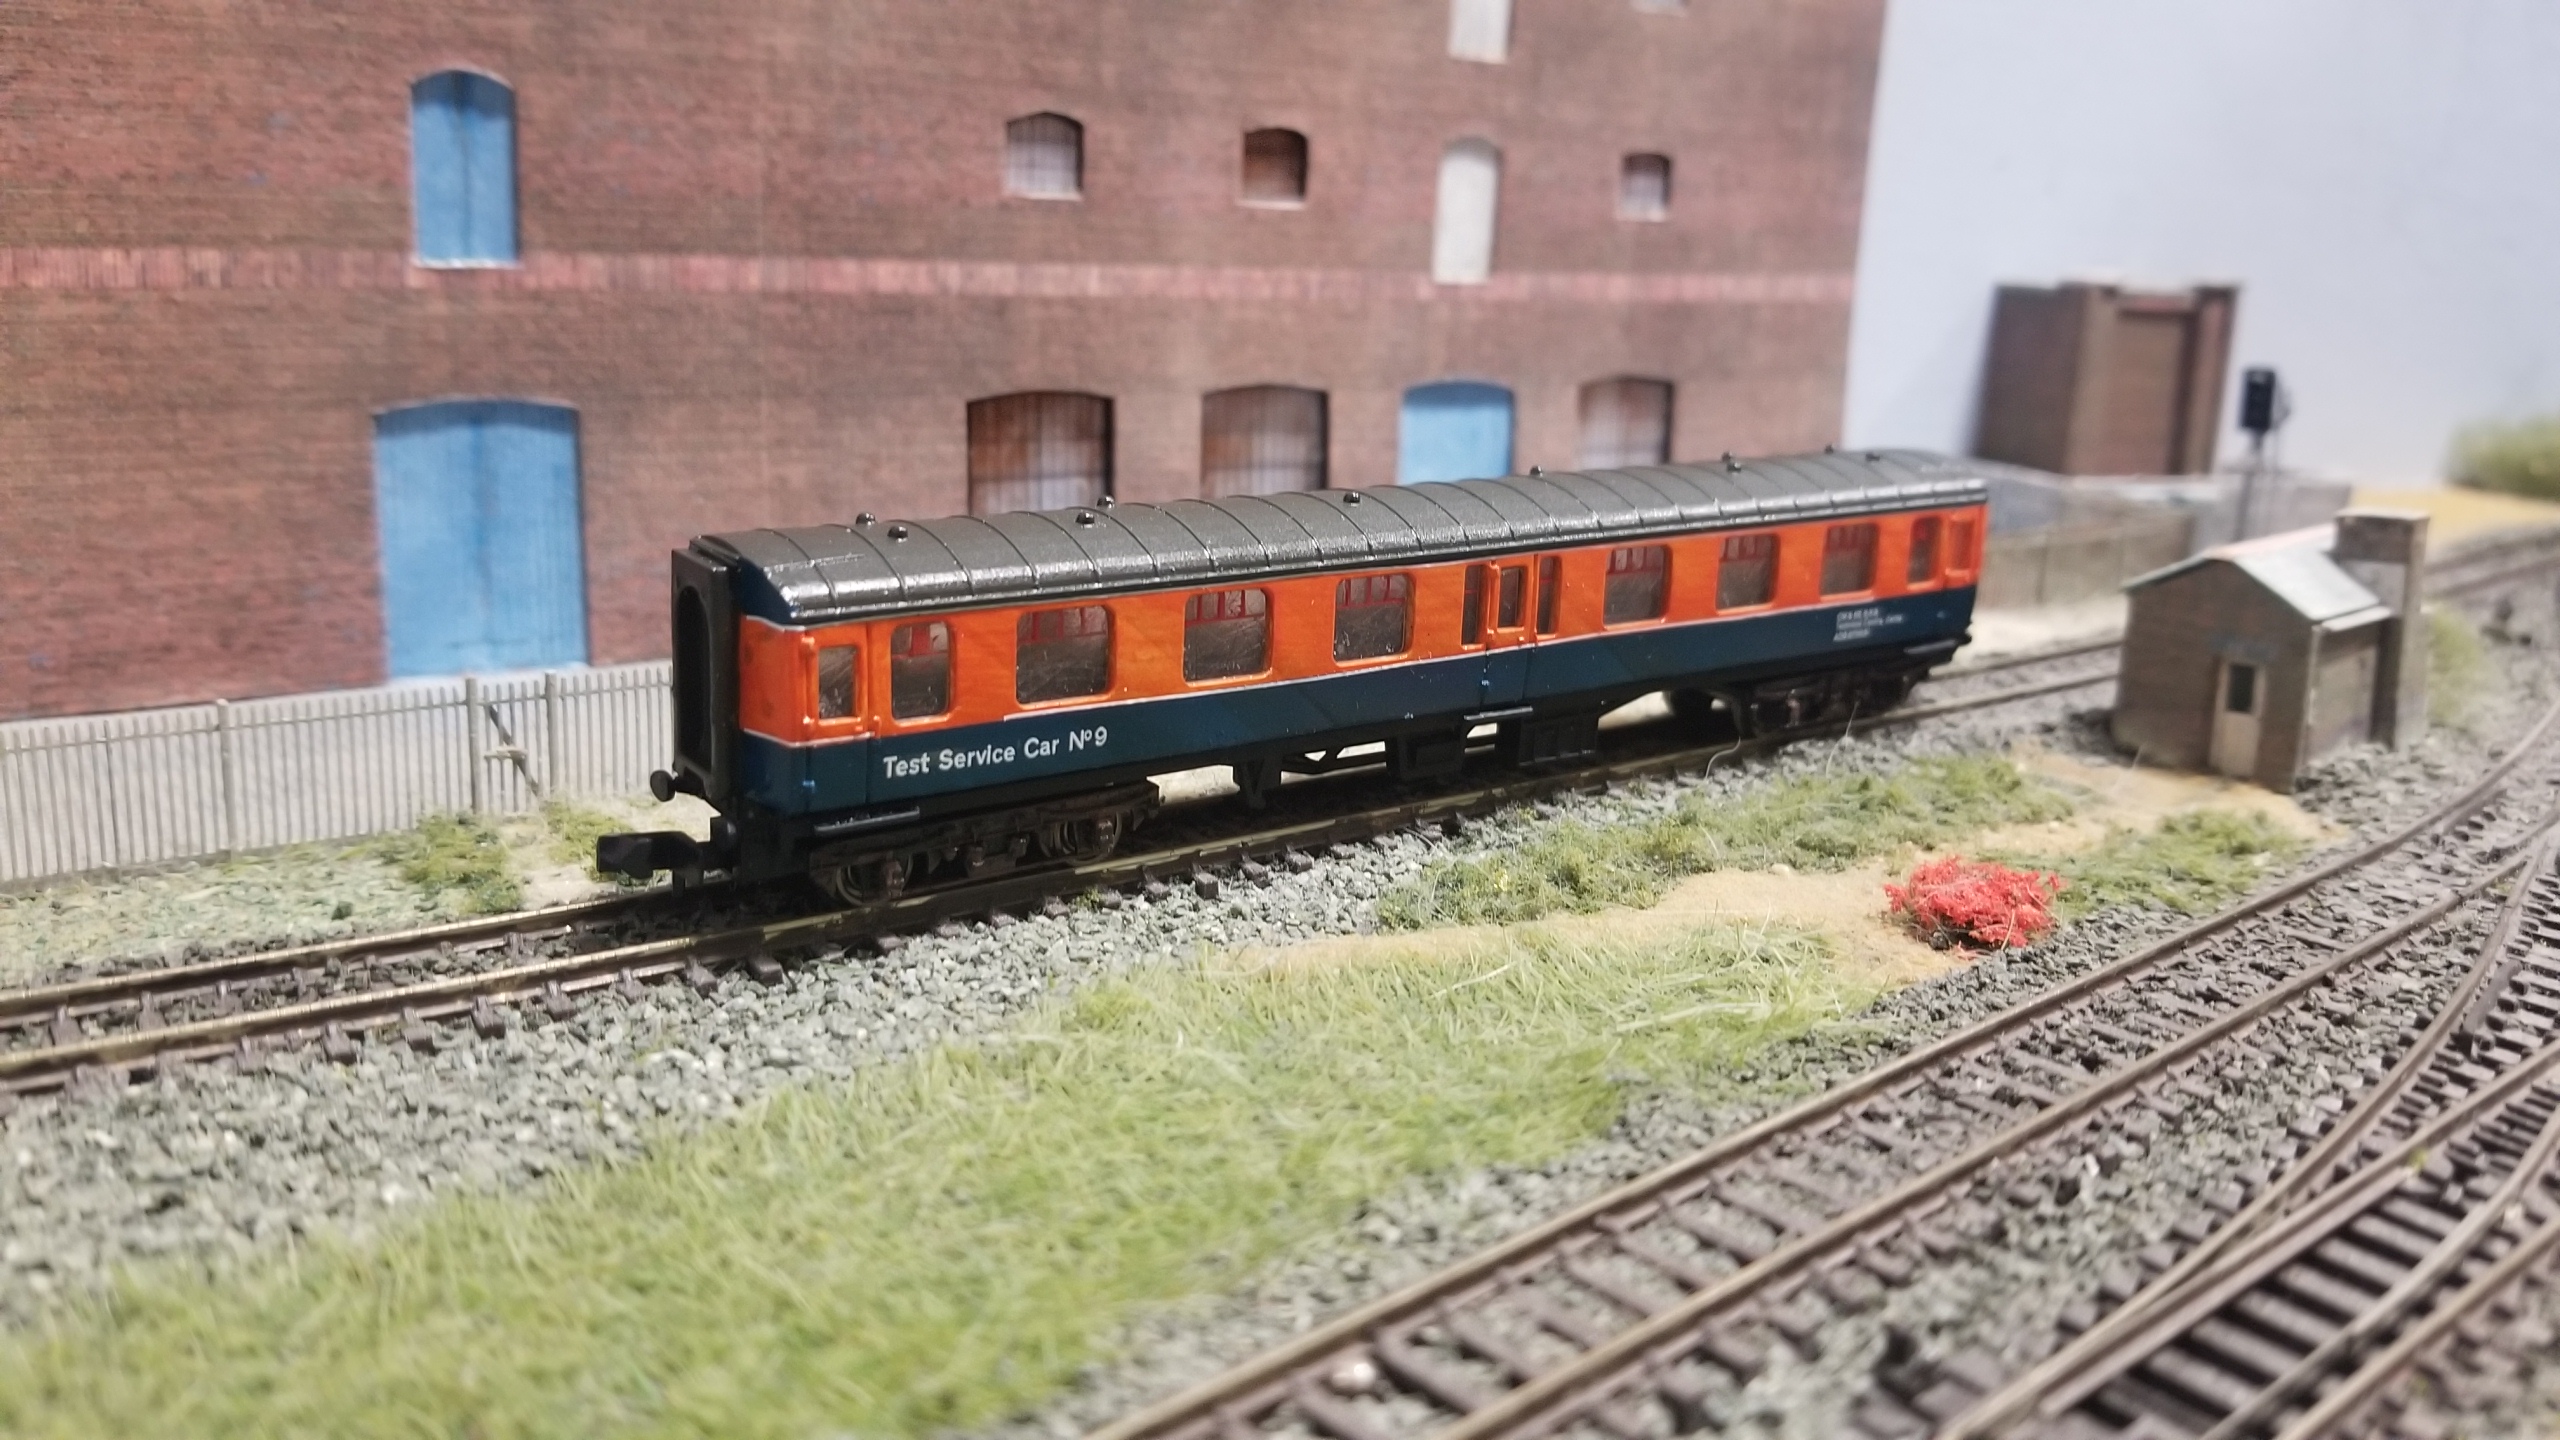 RDB975631 - Test Service Car No9 in RTC Red & Blue livery. © Bees Hill Models, all rights reserved.